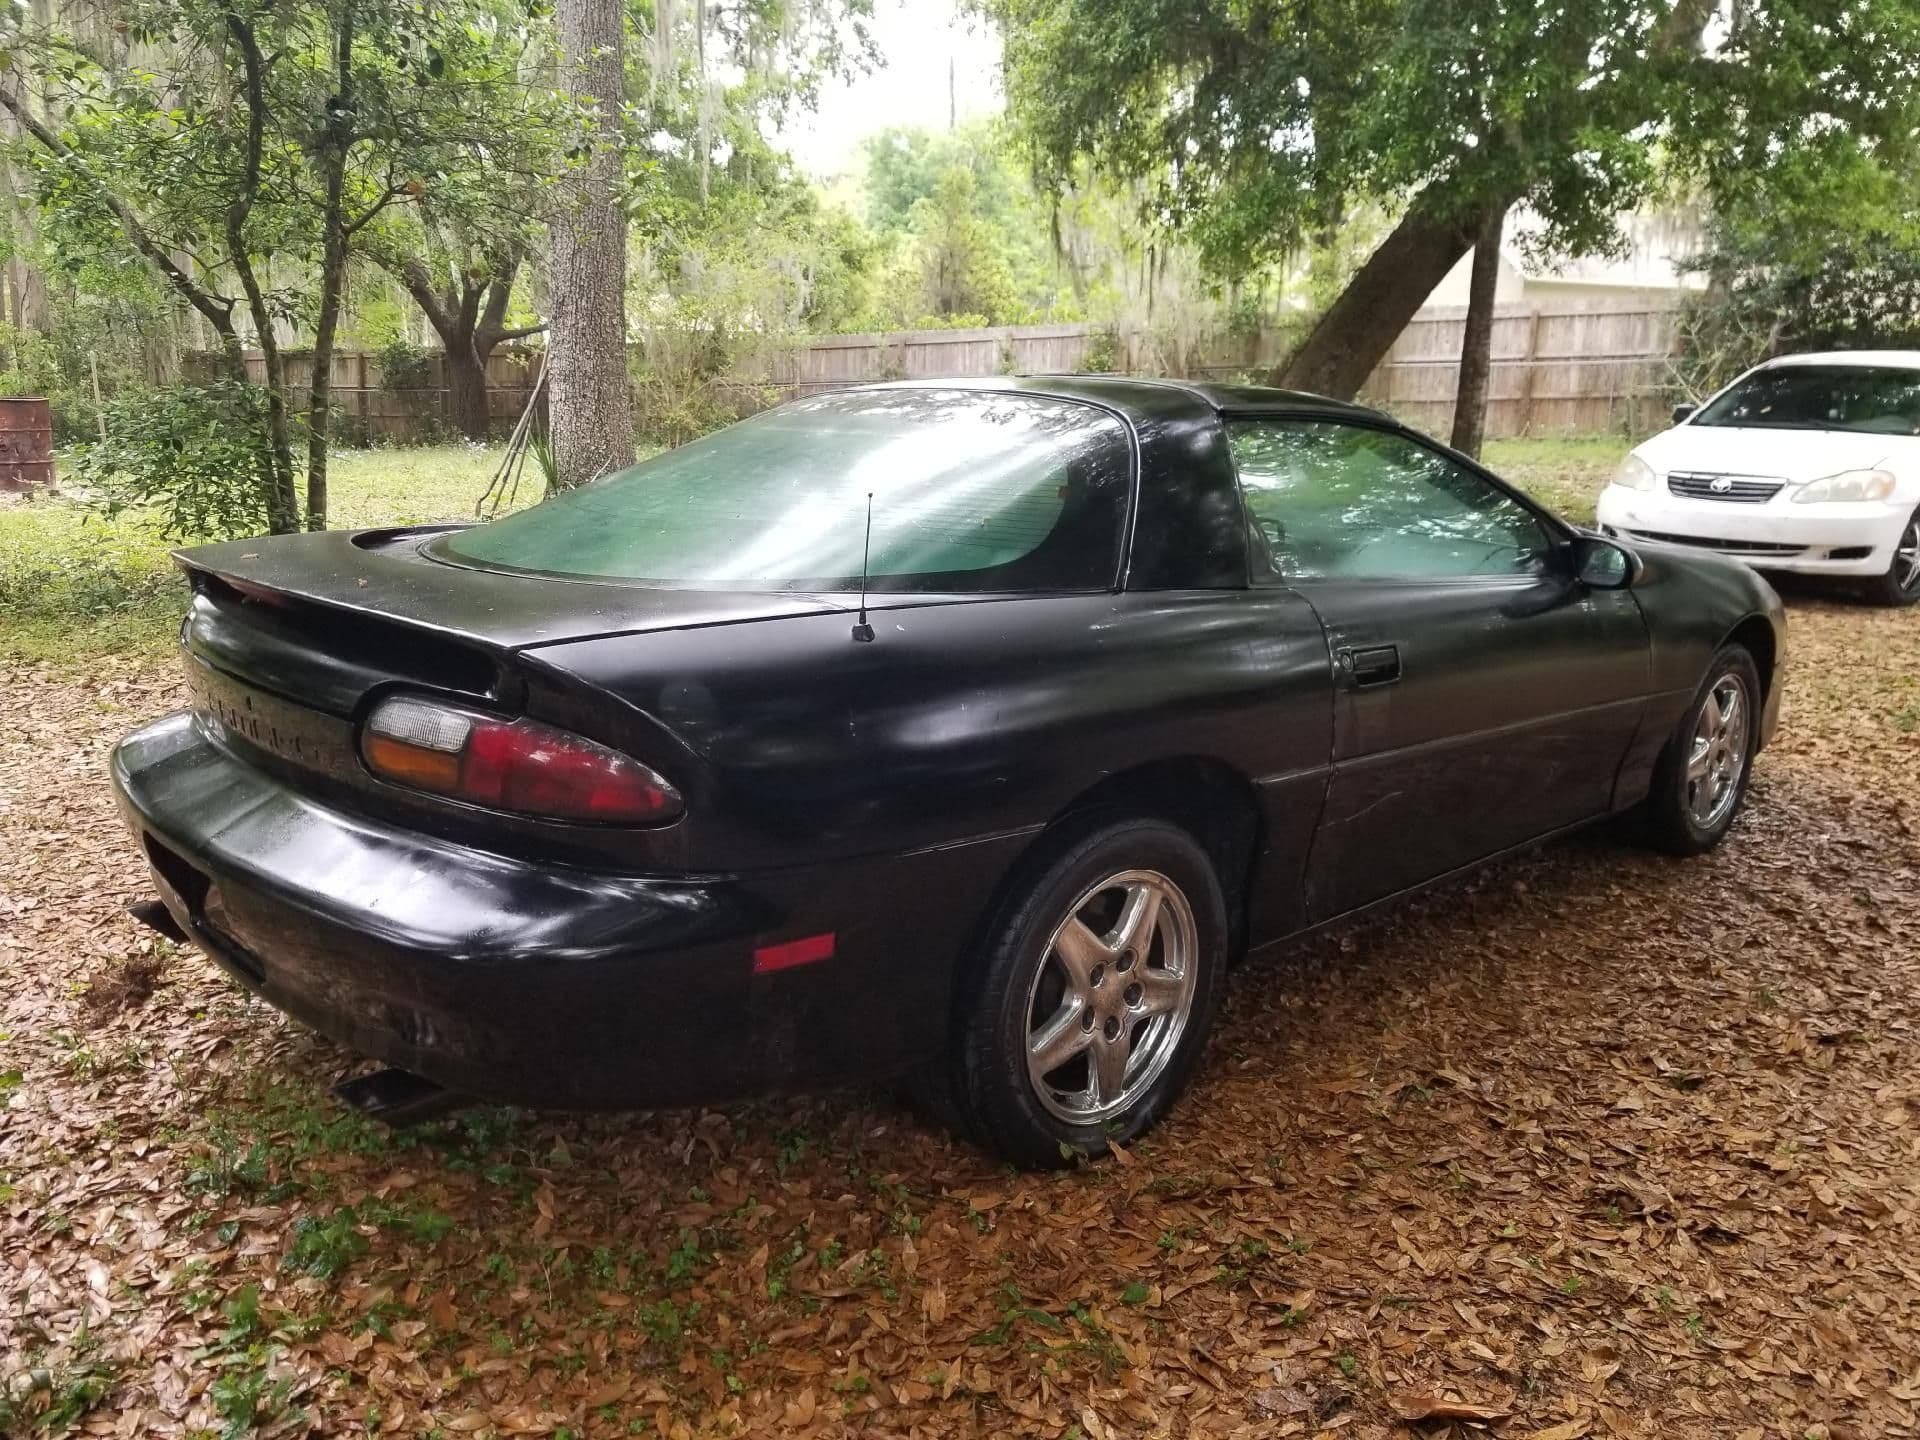 1999 Chevrolet Camaro - 99 z28 - Used - VIN 2G1FP22G4X2112877 - 113,000 Miles - 8 cyl - 2WD - Automatic - Coupe - Black - Hernando, FL 34442, United States